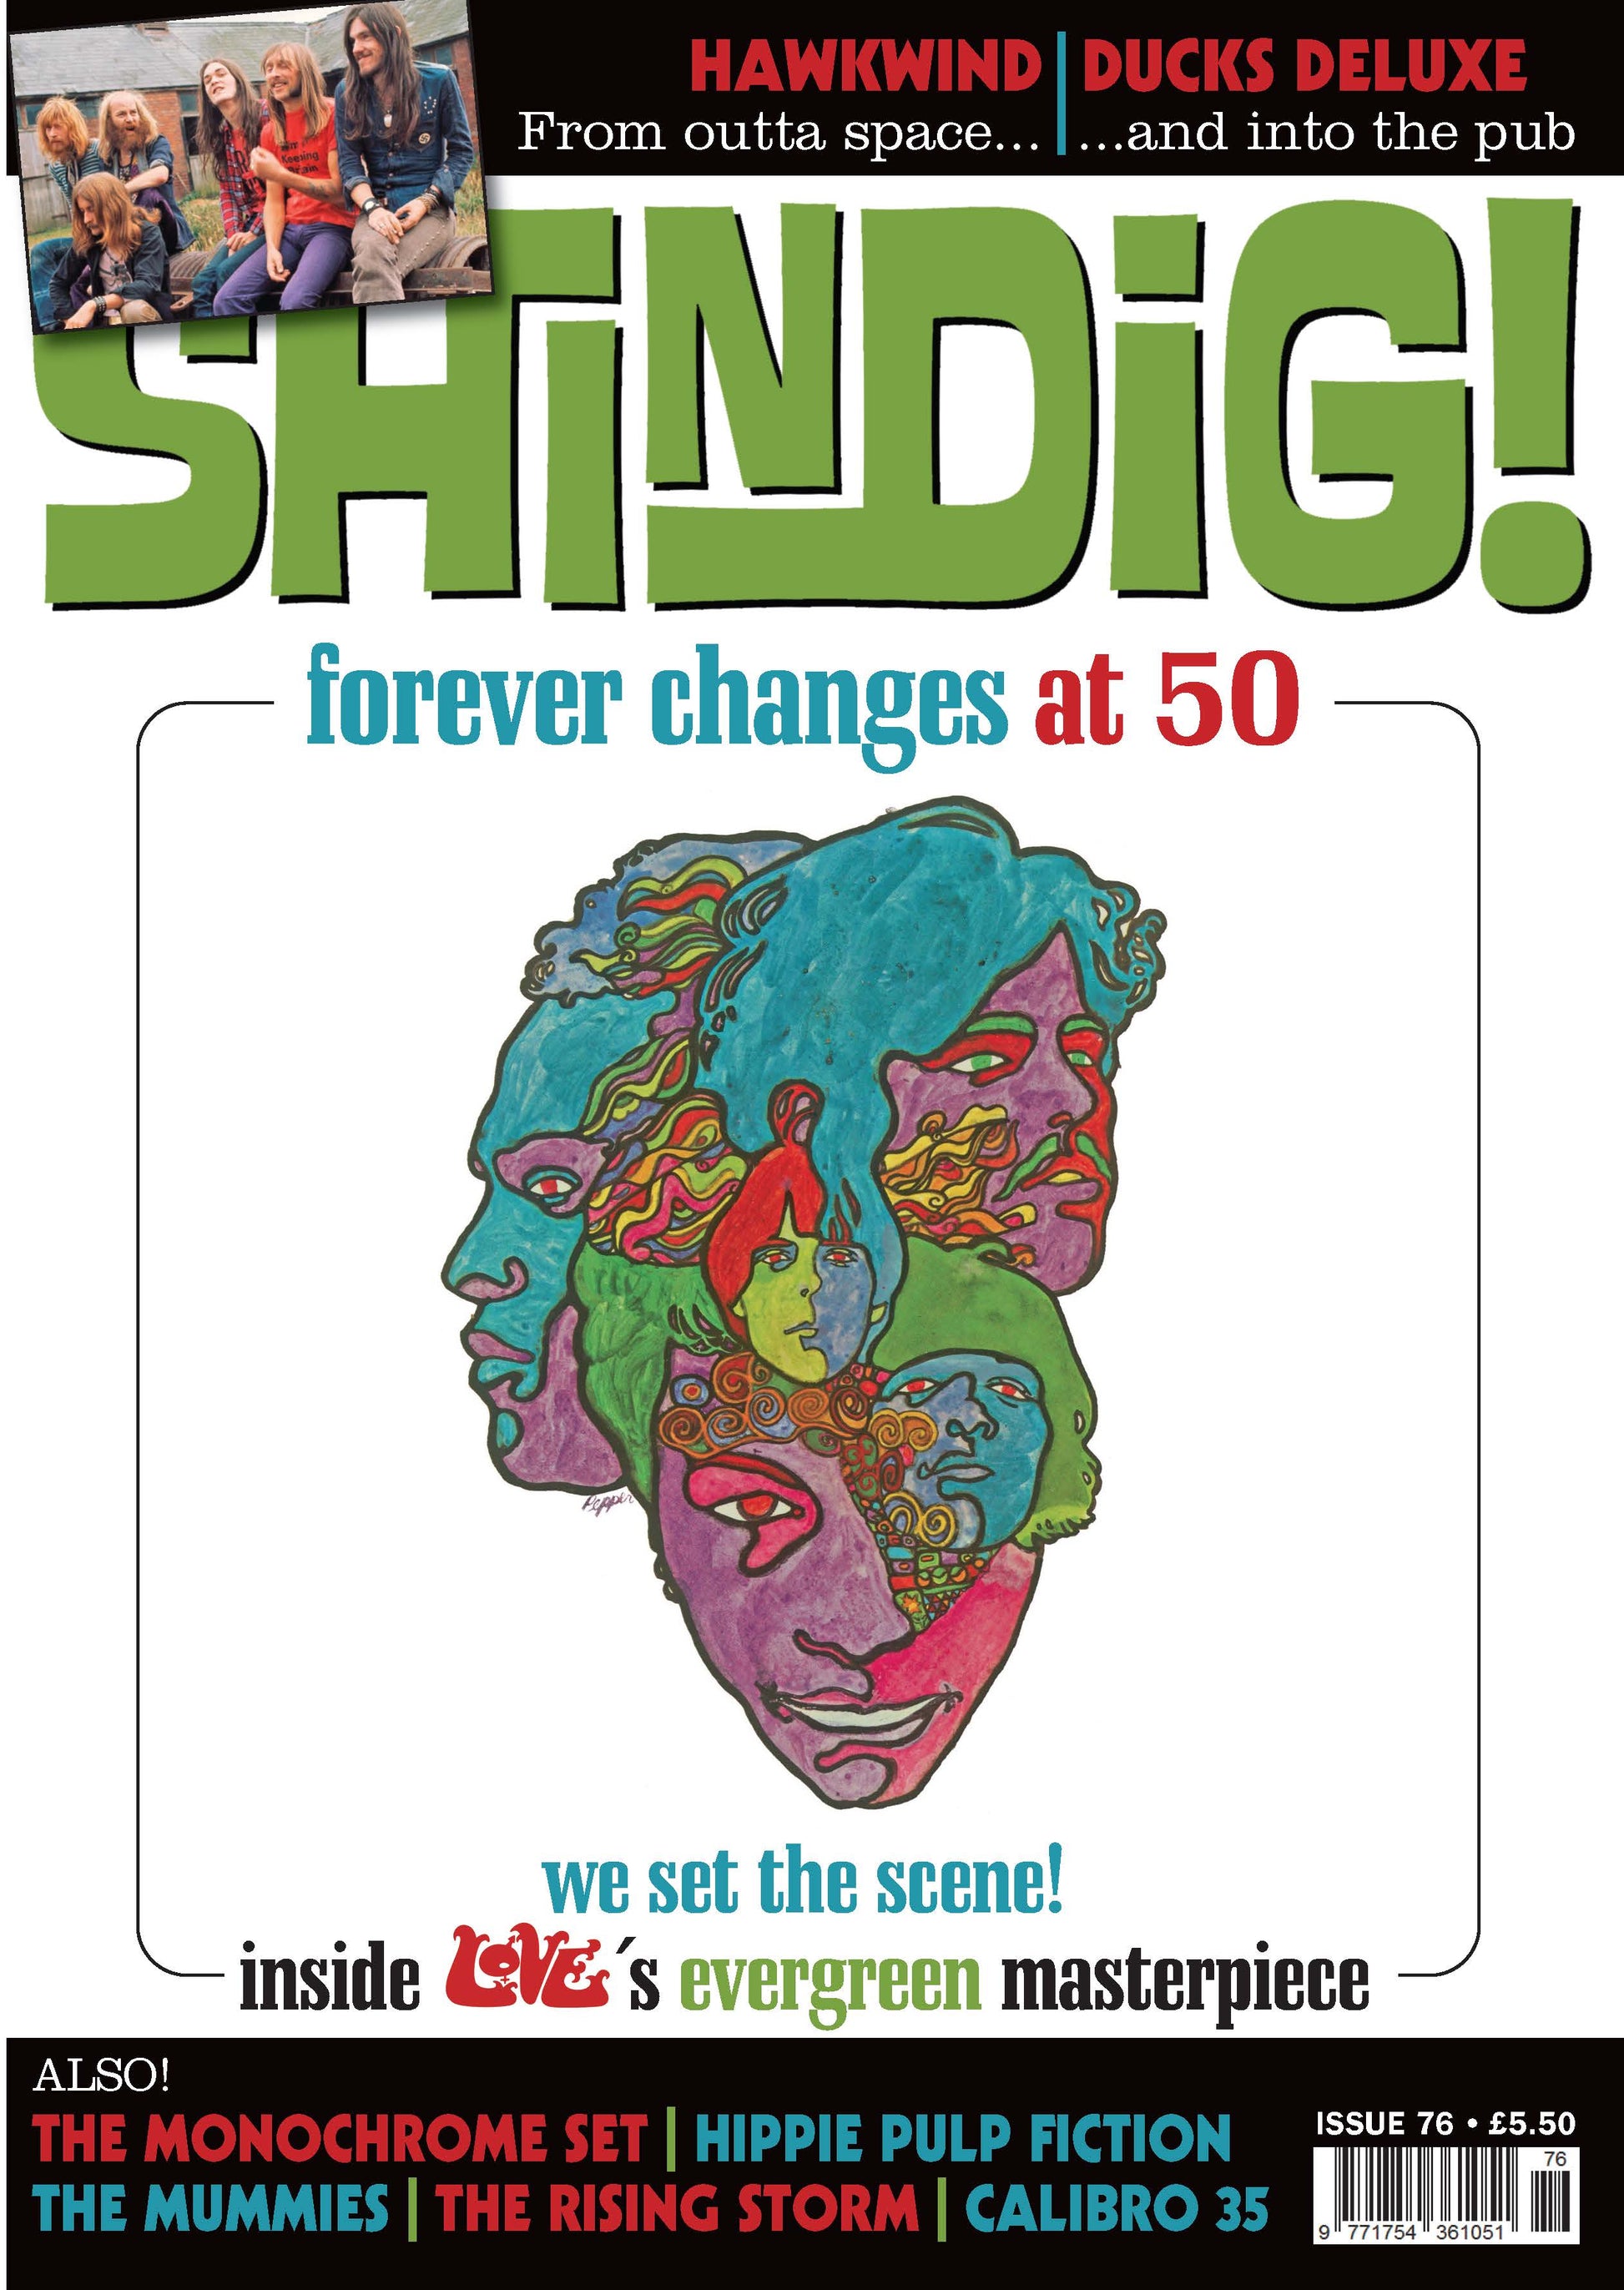 Shindig! Magazine Issue 076 (February 2018) - Love Forever Changes at 50